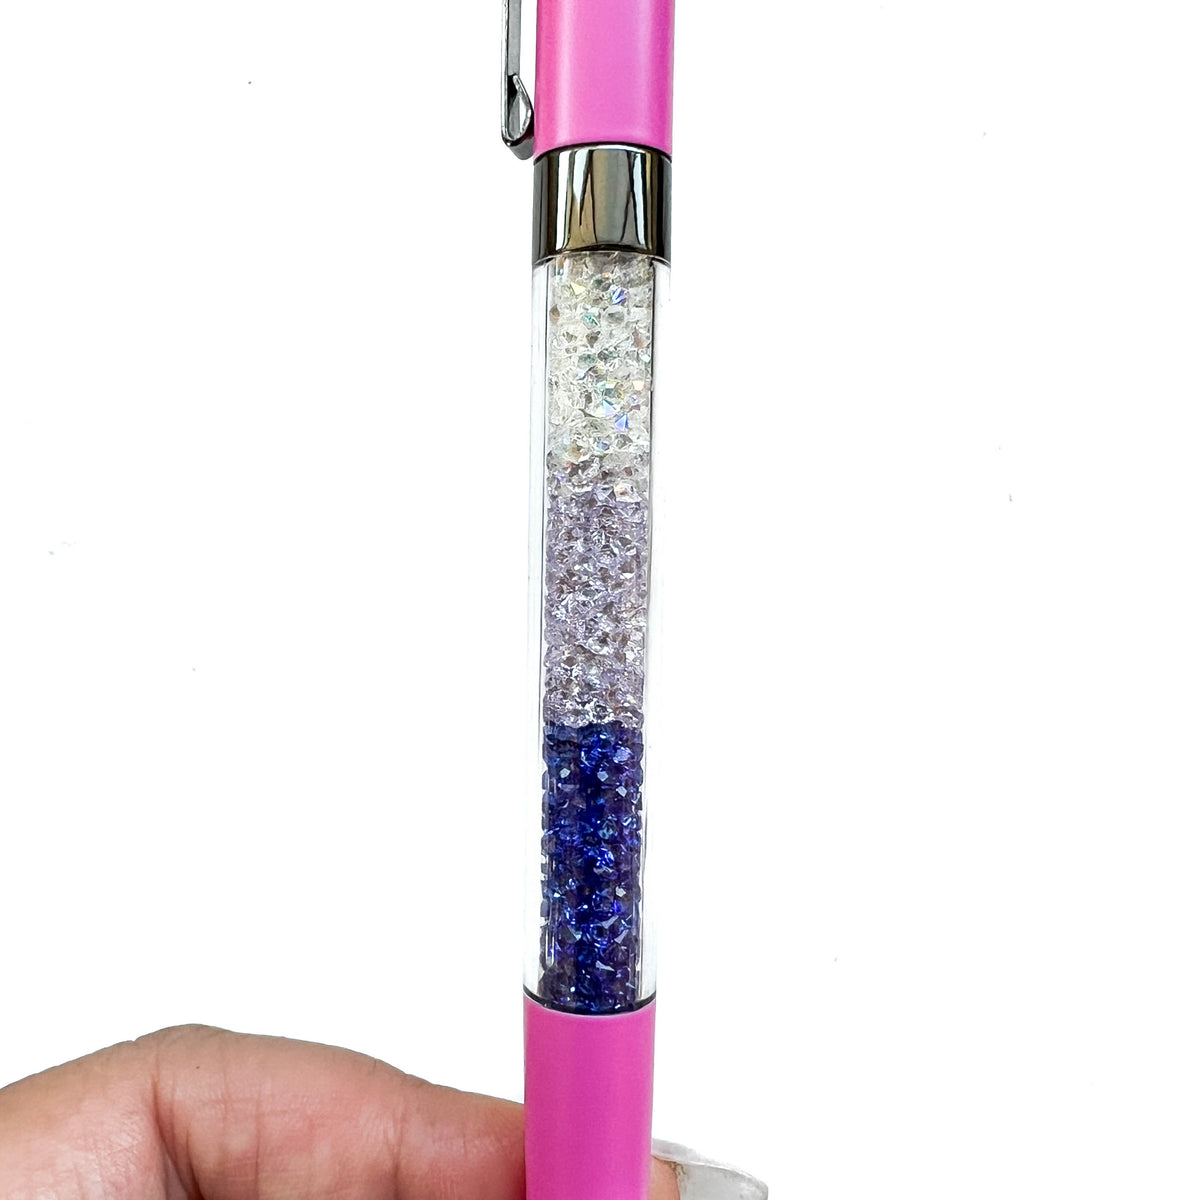 Candy Yum Crystal VBPen | limited pen